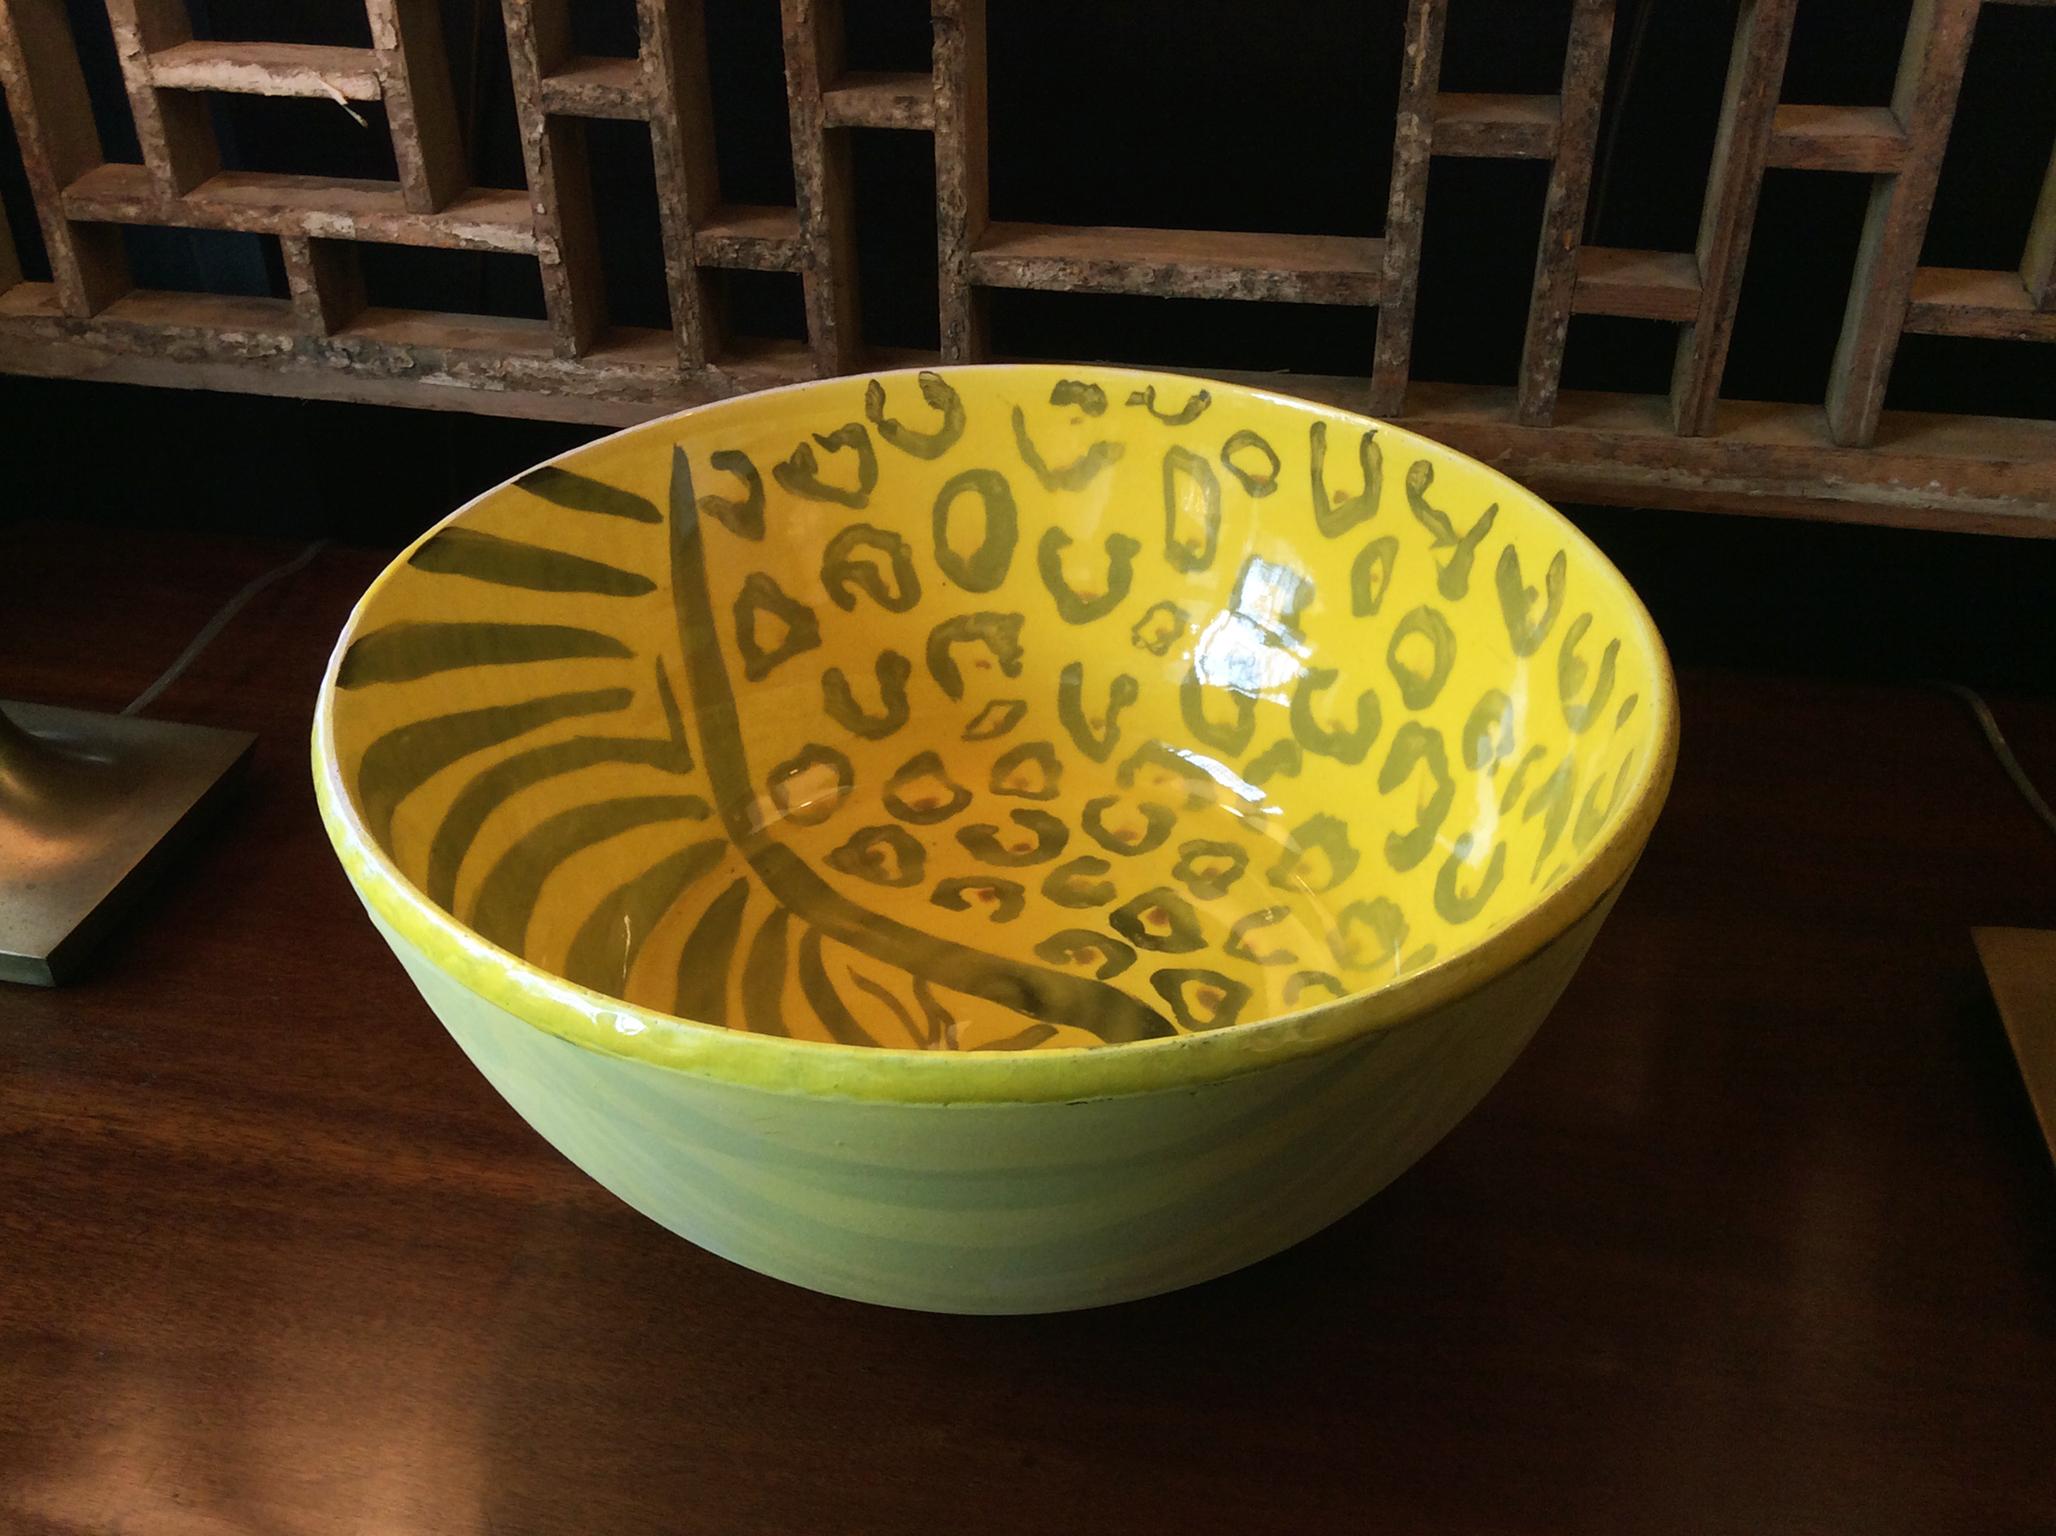 A ceramic stoneware bowl by Thom Lussier, from his series of beautifully patterned vessels, some with zebra stripes, others with more subtle but nevertheless rich, painterly surfaces. This bright yellow bowl is a mix of various finishes. The